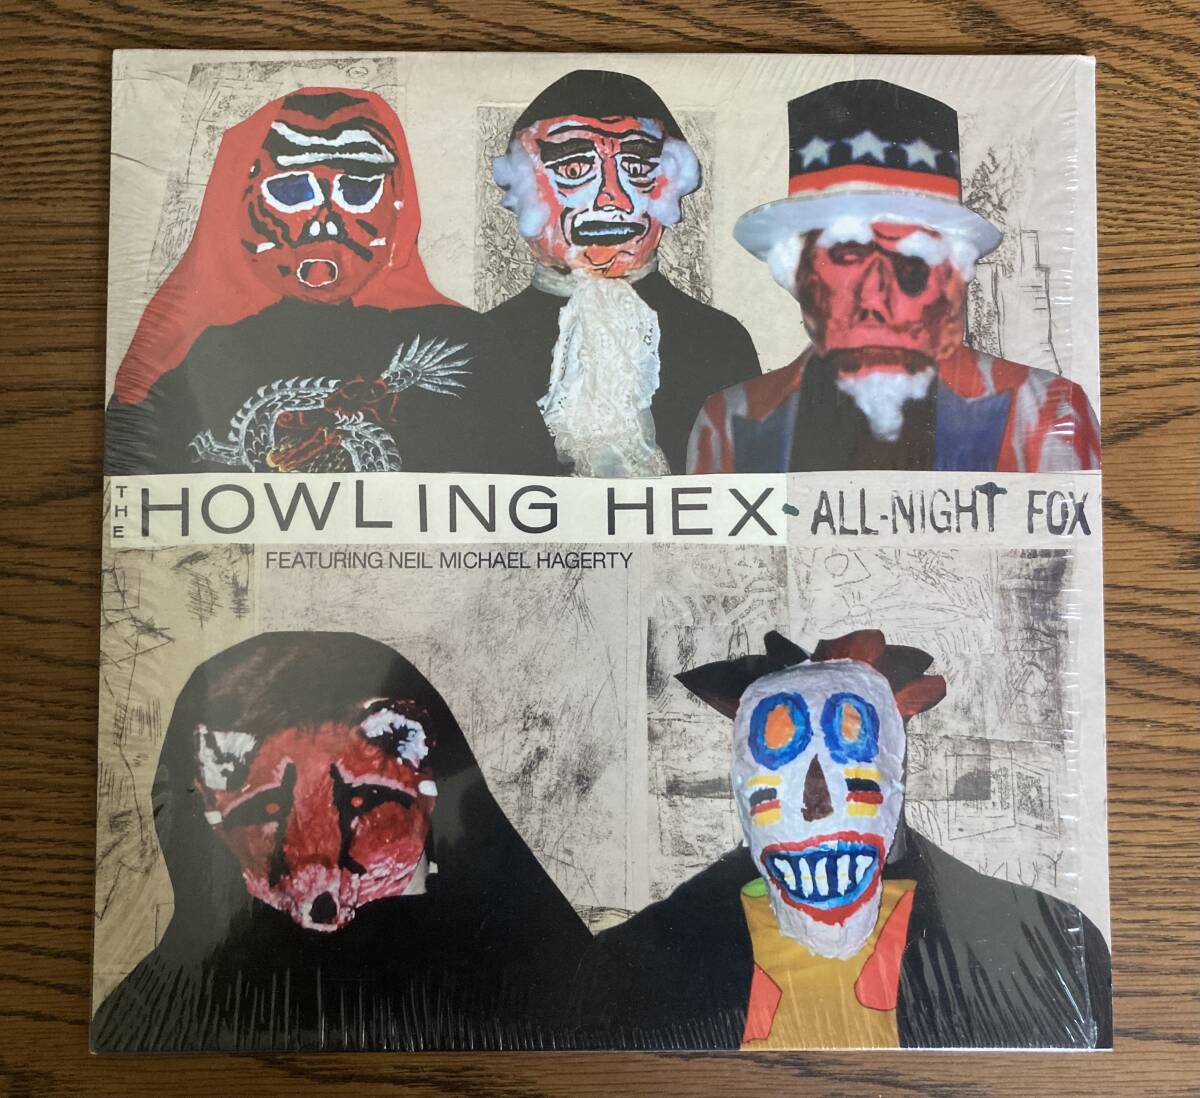 [The Howling Hex / All-Night Fox] Drag City Neil Michael Hagerty Royal Trux _画像1